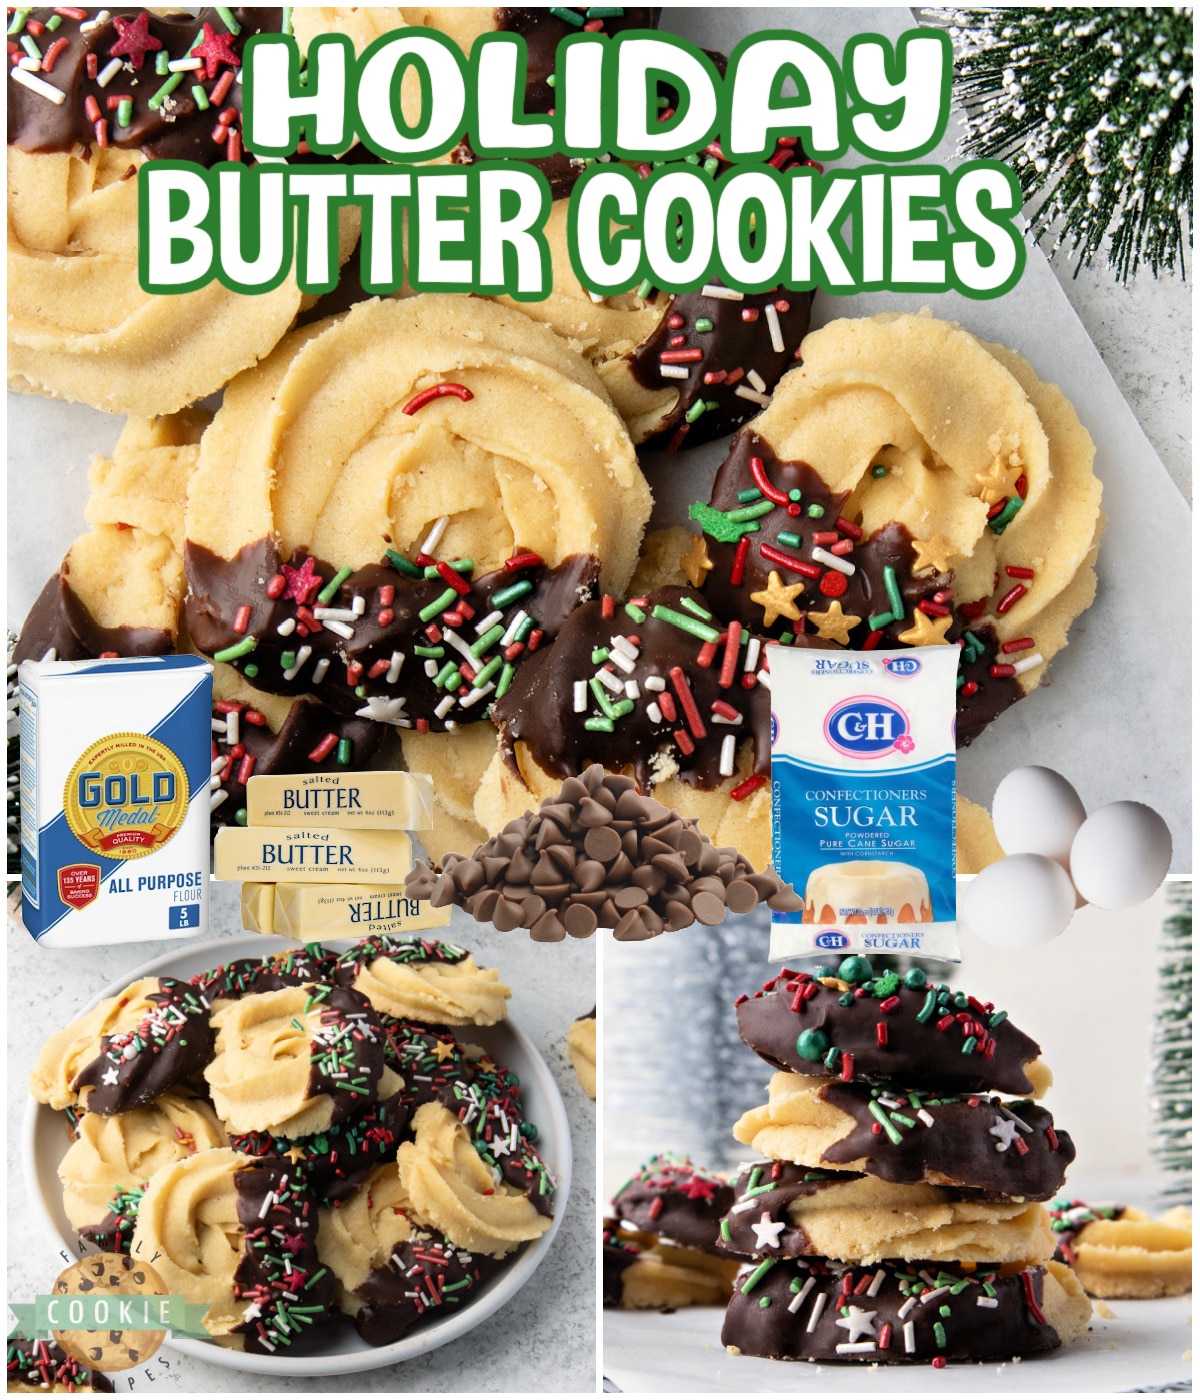 Classic holiday butter cookies made with buttery cookie dough and covered in chocolate & sprinkles. Incredible shortbread cookie with a delicate texture and fantastic flavor!